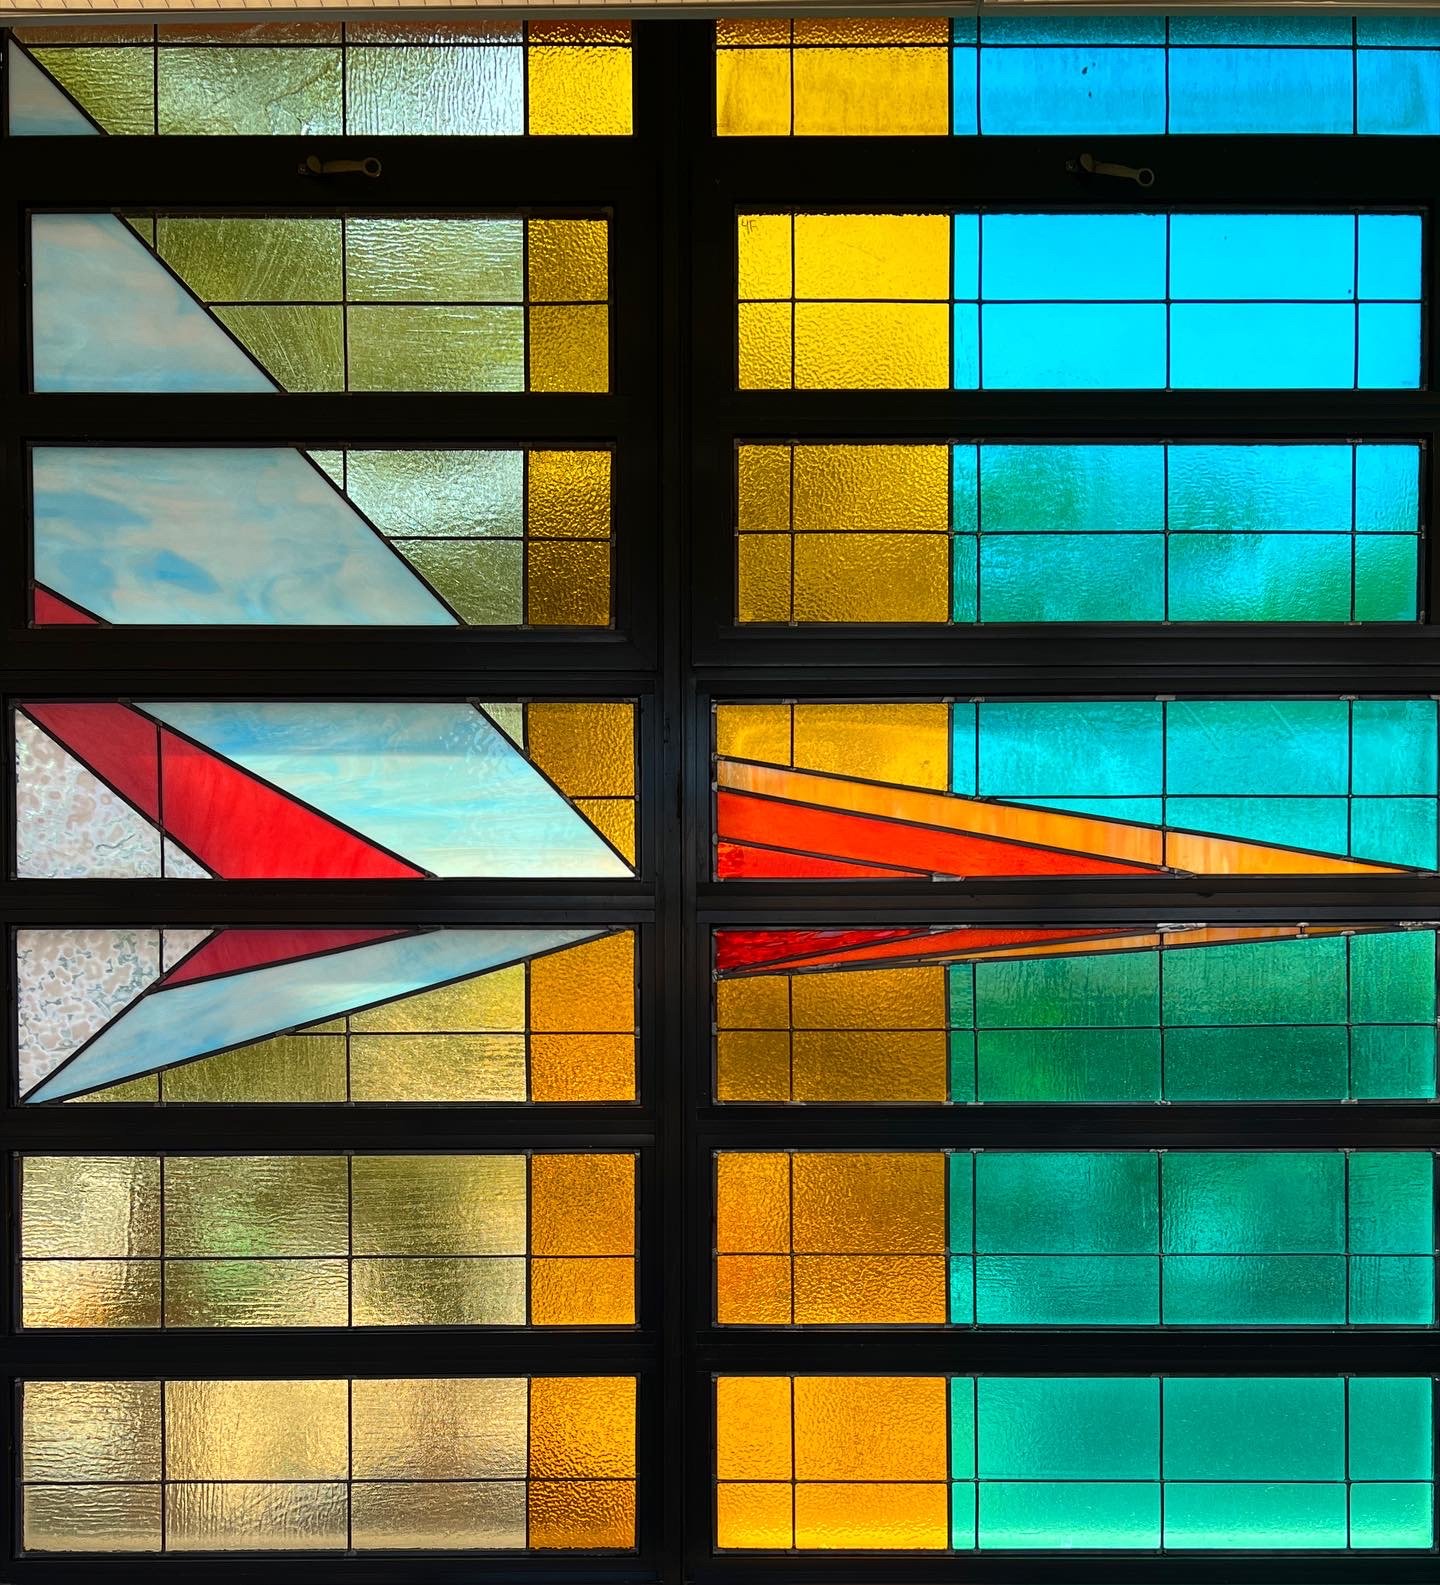 A side-view of a multi-colored, multi-paneled, stained glass window taken from the hallway of a school. Also, included are two close-ups of sections of the stained glass installation.